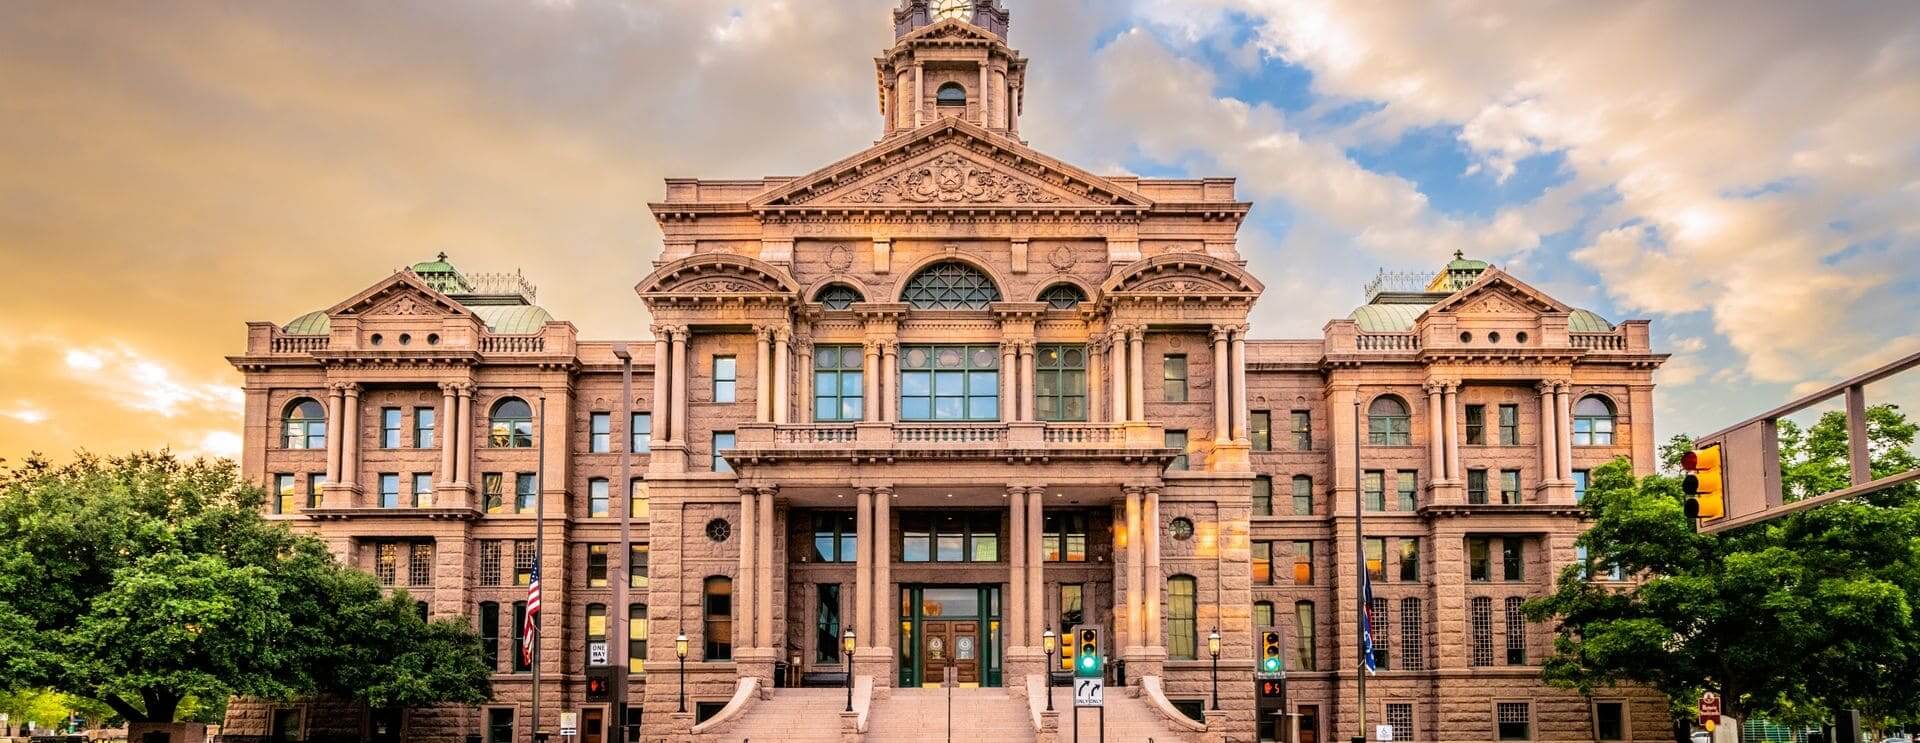 Historical Fort Worth courthouse